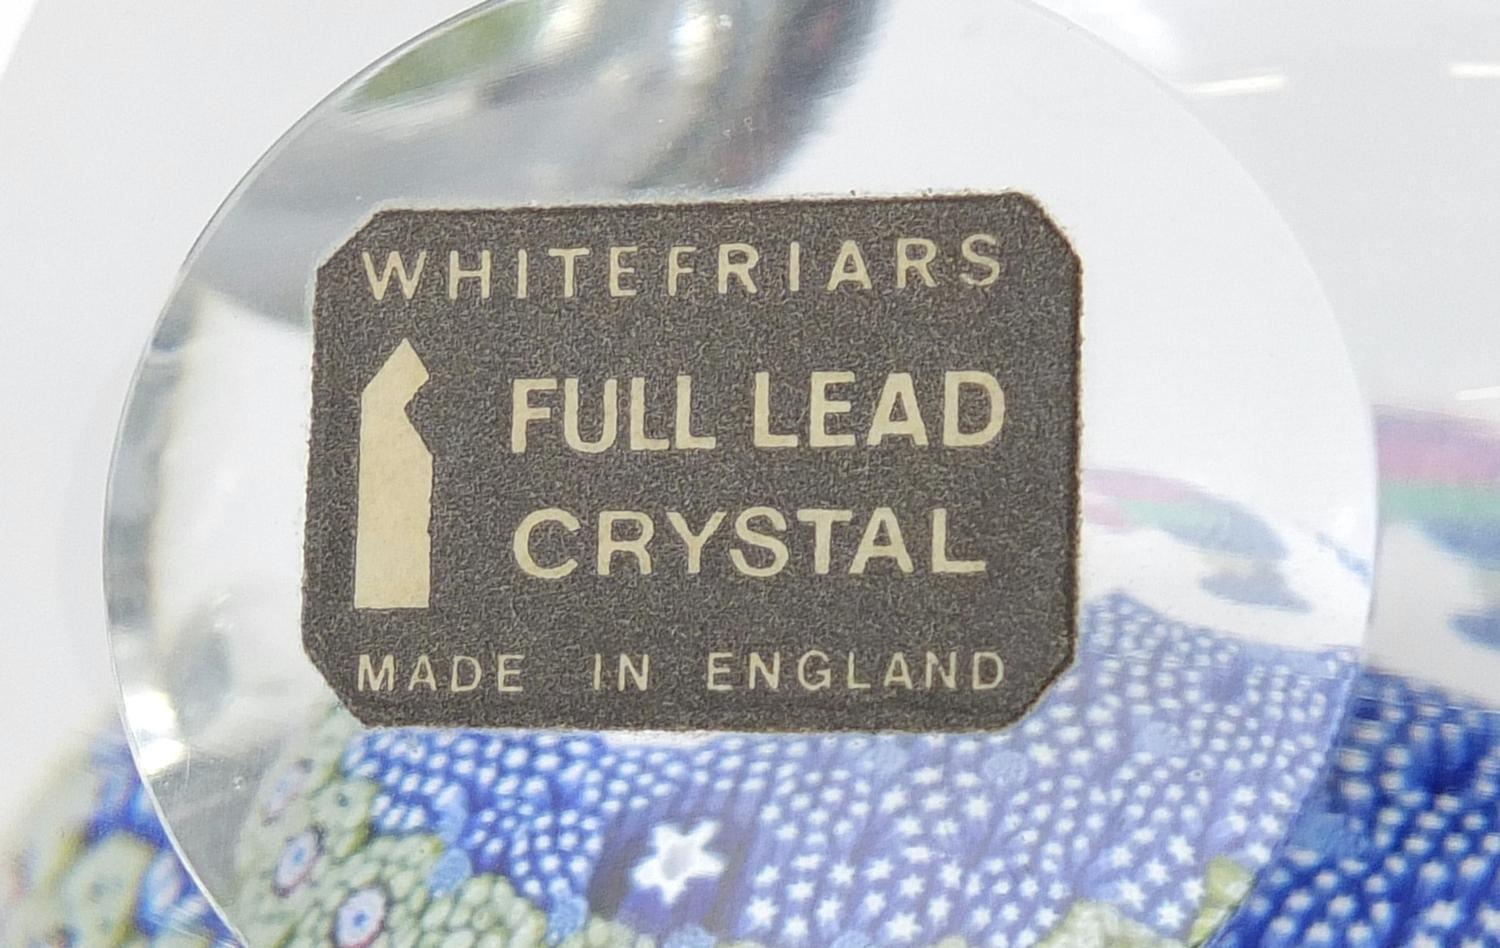 Whitefriars Christmas faceted glass paperweight, numbered 523 with paper label, 8cm in diameter : - Image 4 of 6